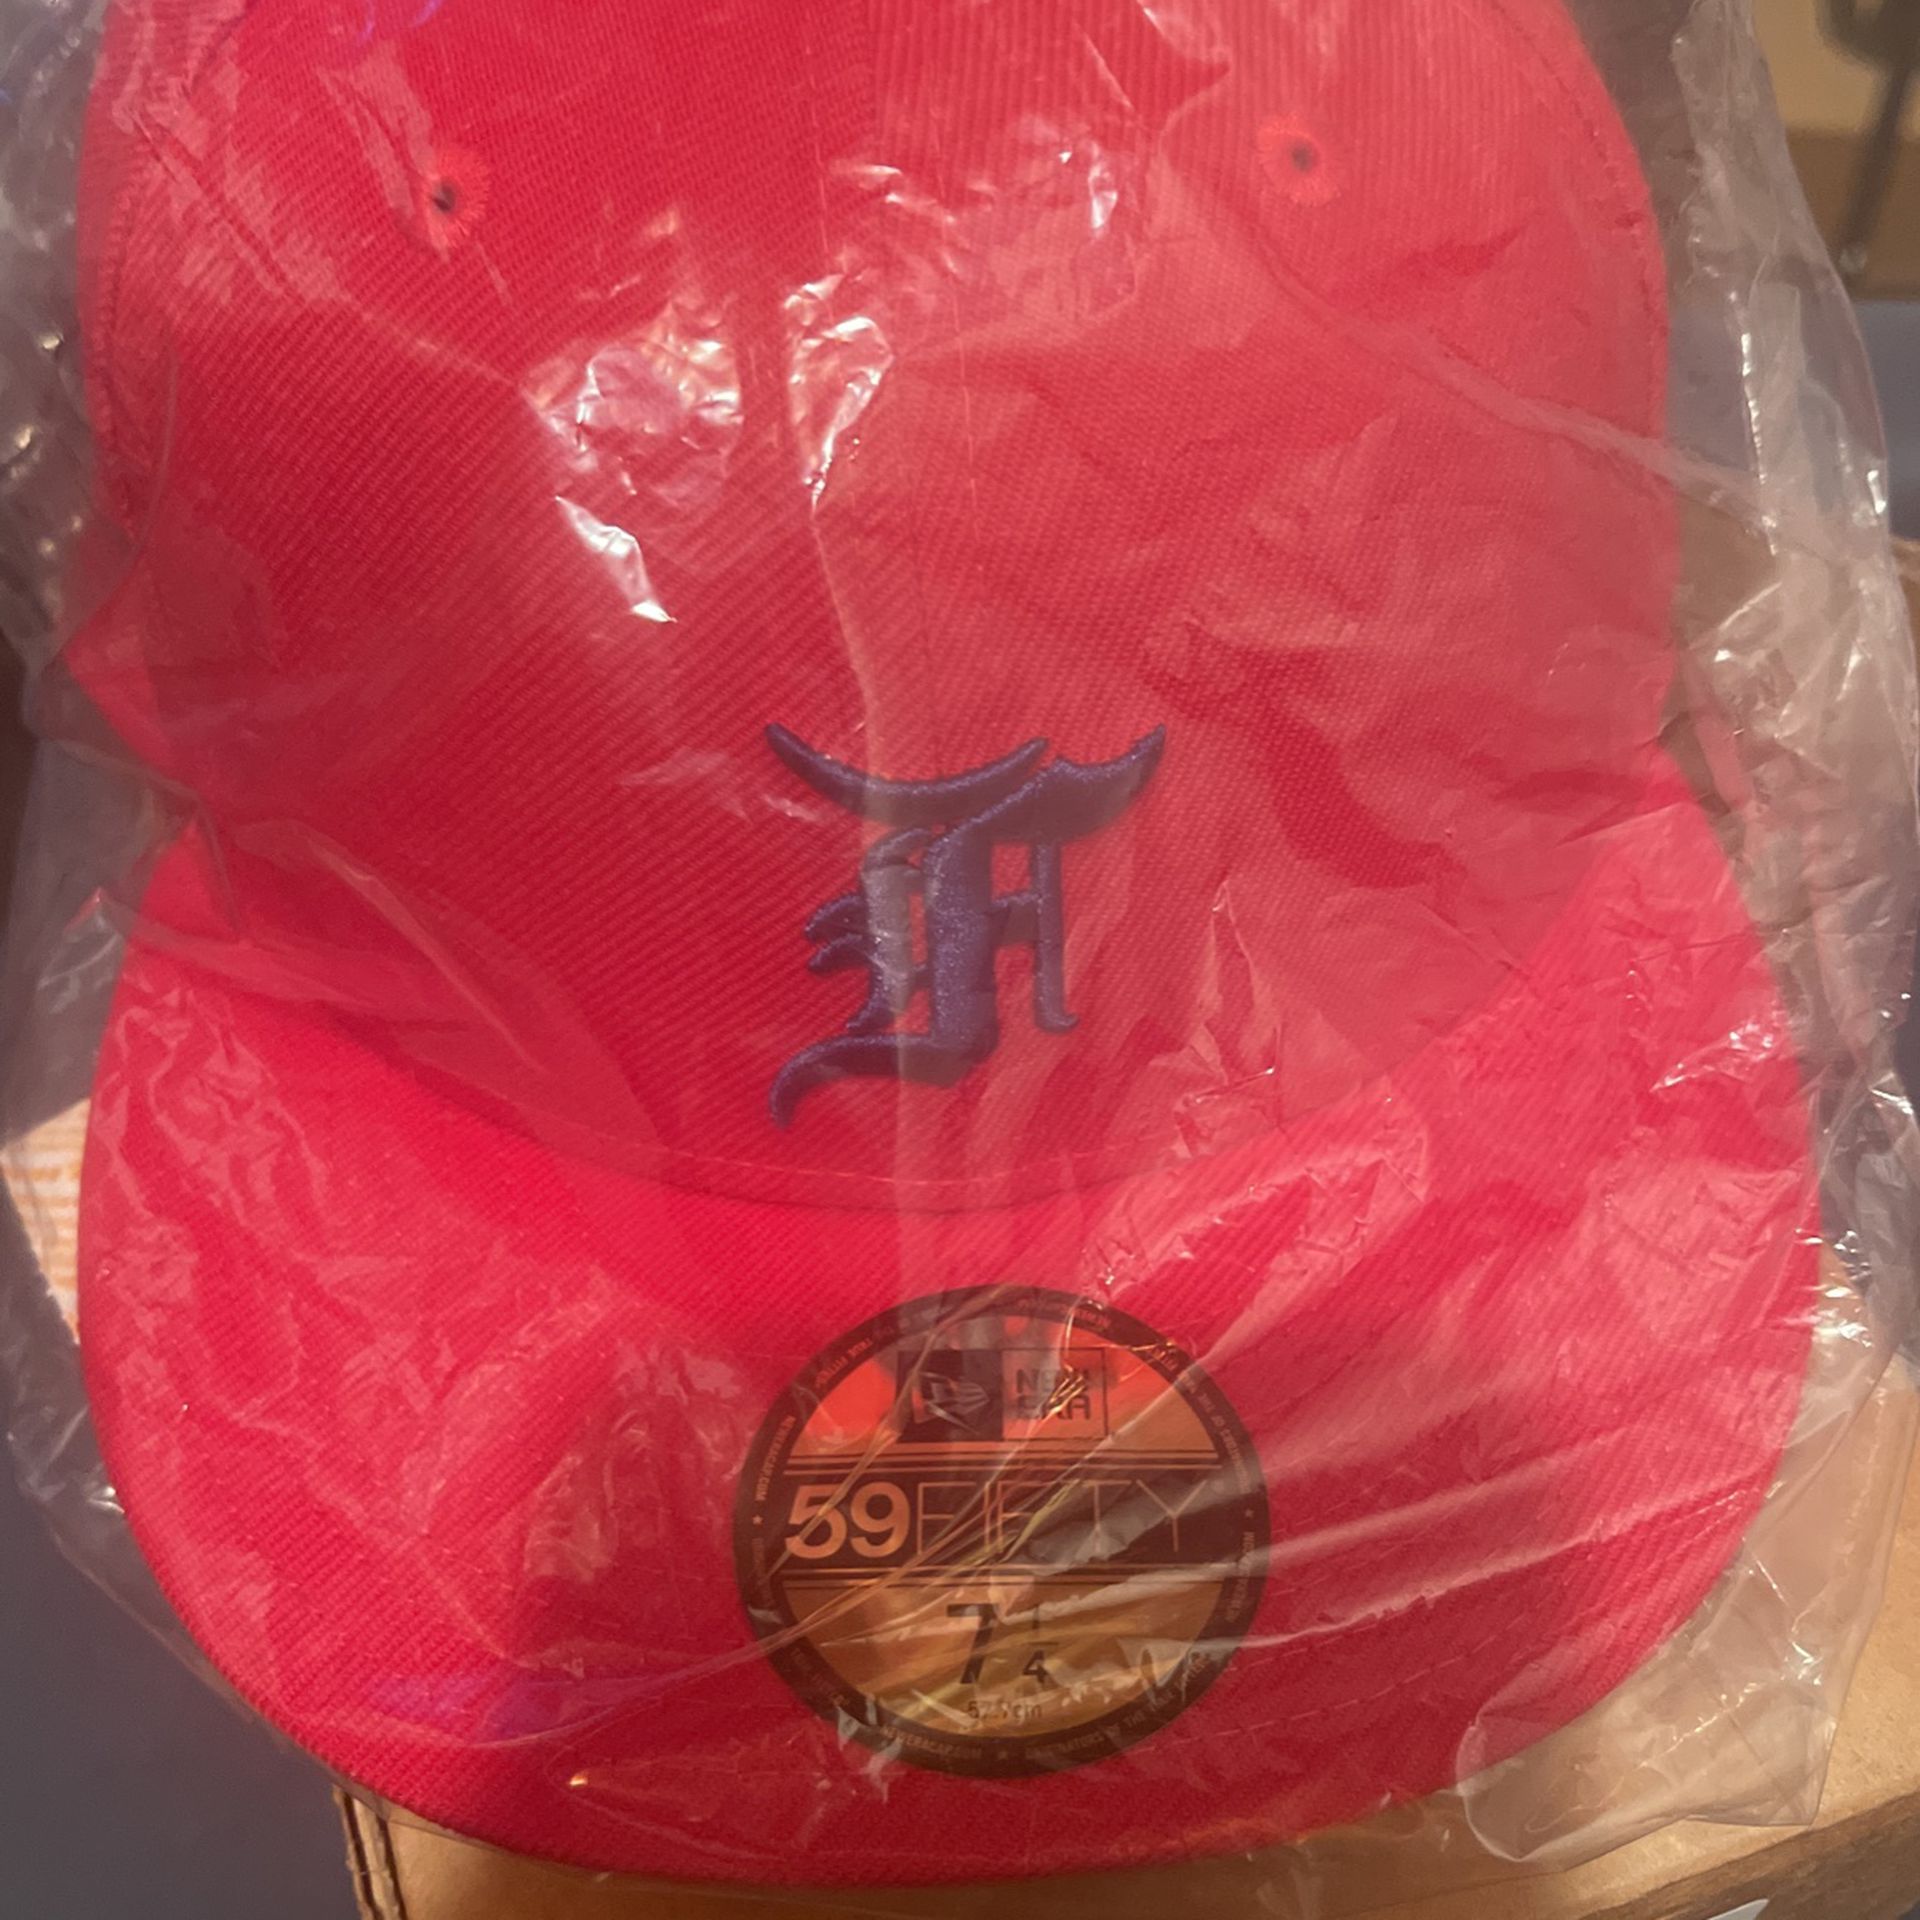 YSL New Era 9Forty Baseball Cap for Sale in Tinton Falls, NJ - OfferUp